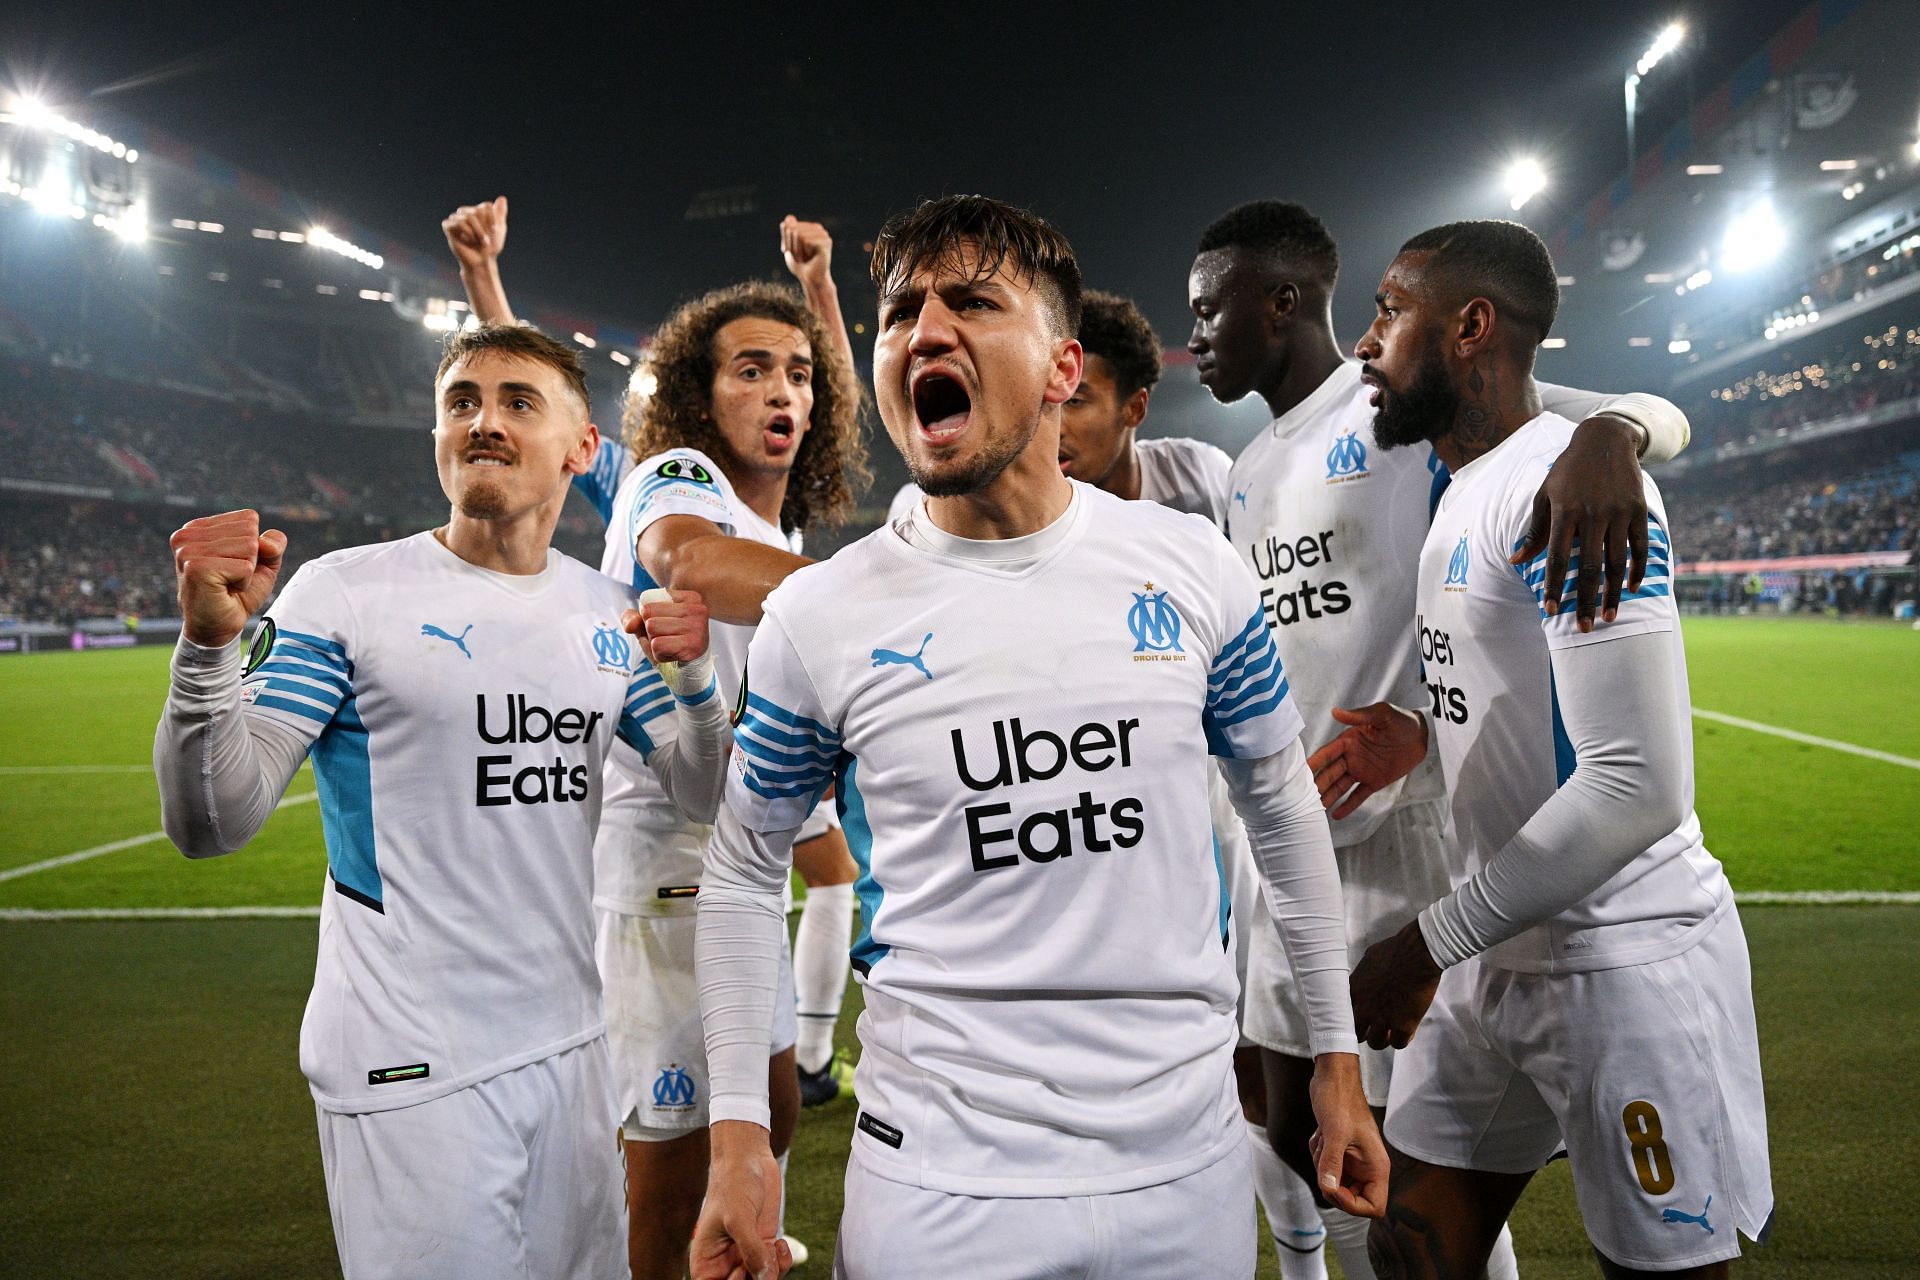 Marseille face Saint-Etienne in their upcoming Ligue 1 fixture